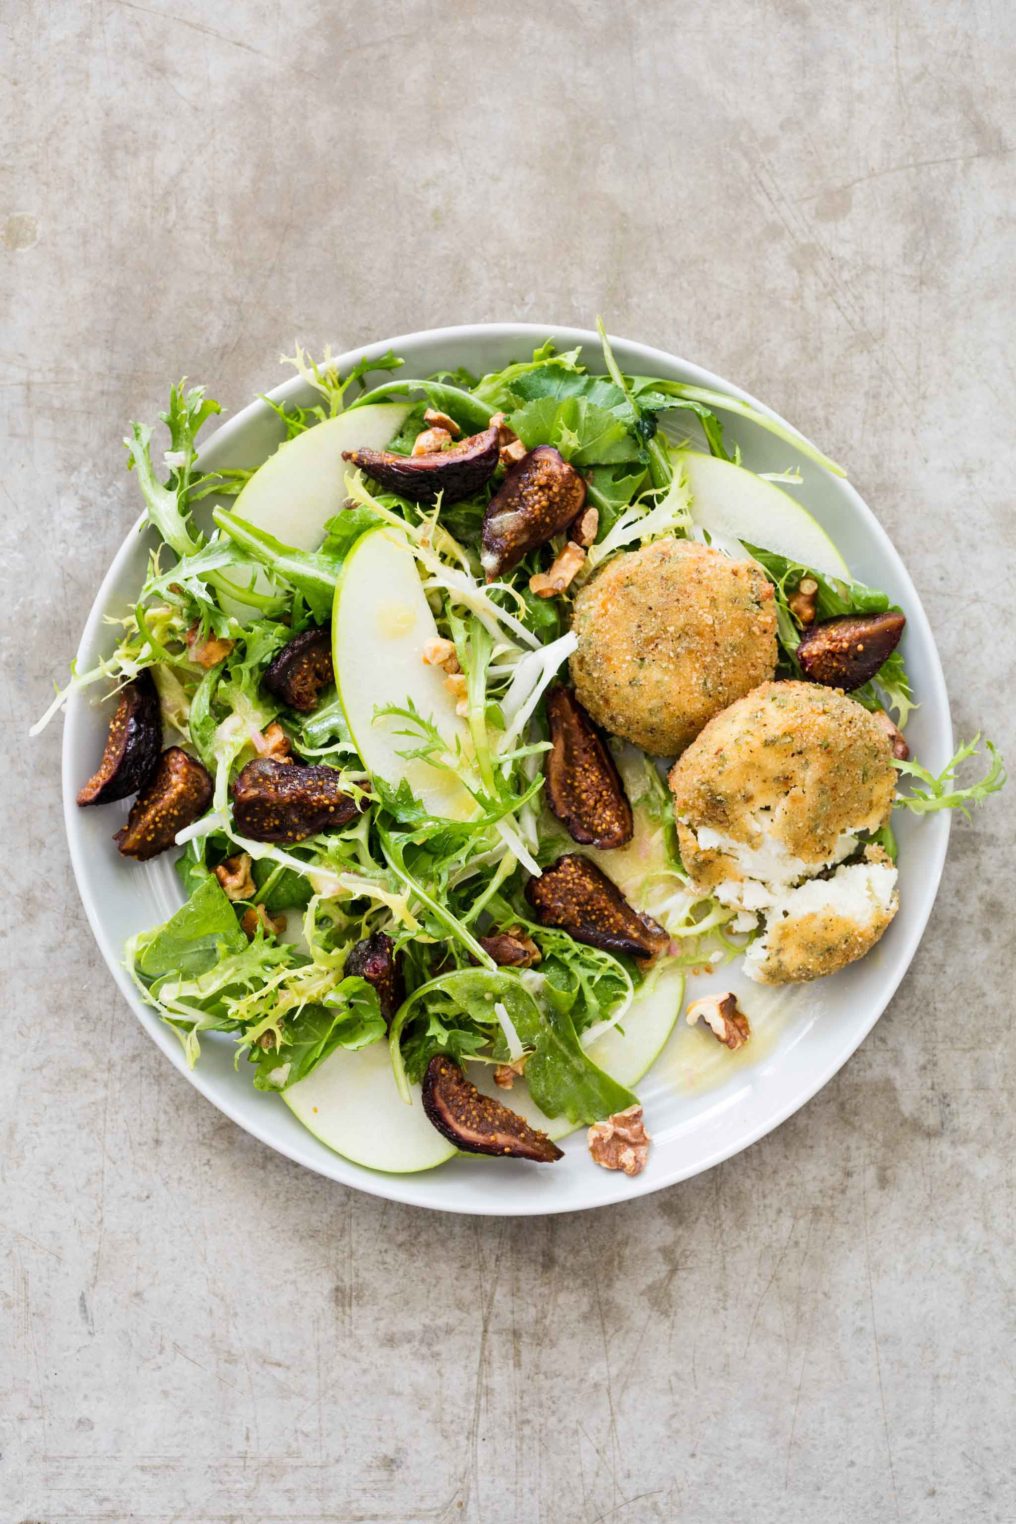 Baked goat cheese tops an apple salad with figs, and walnuts for a center stage salad.